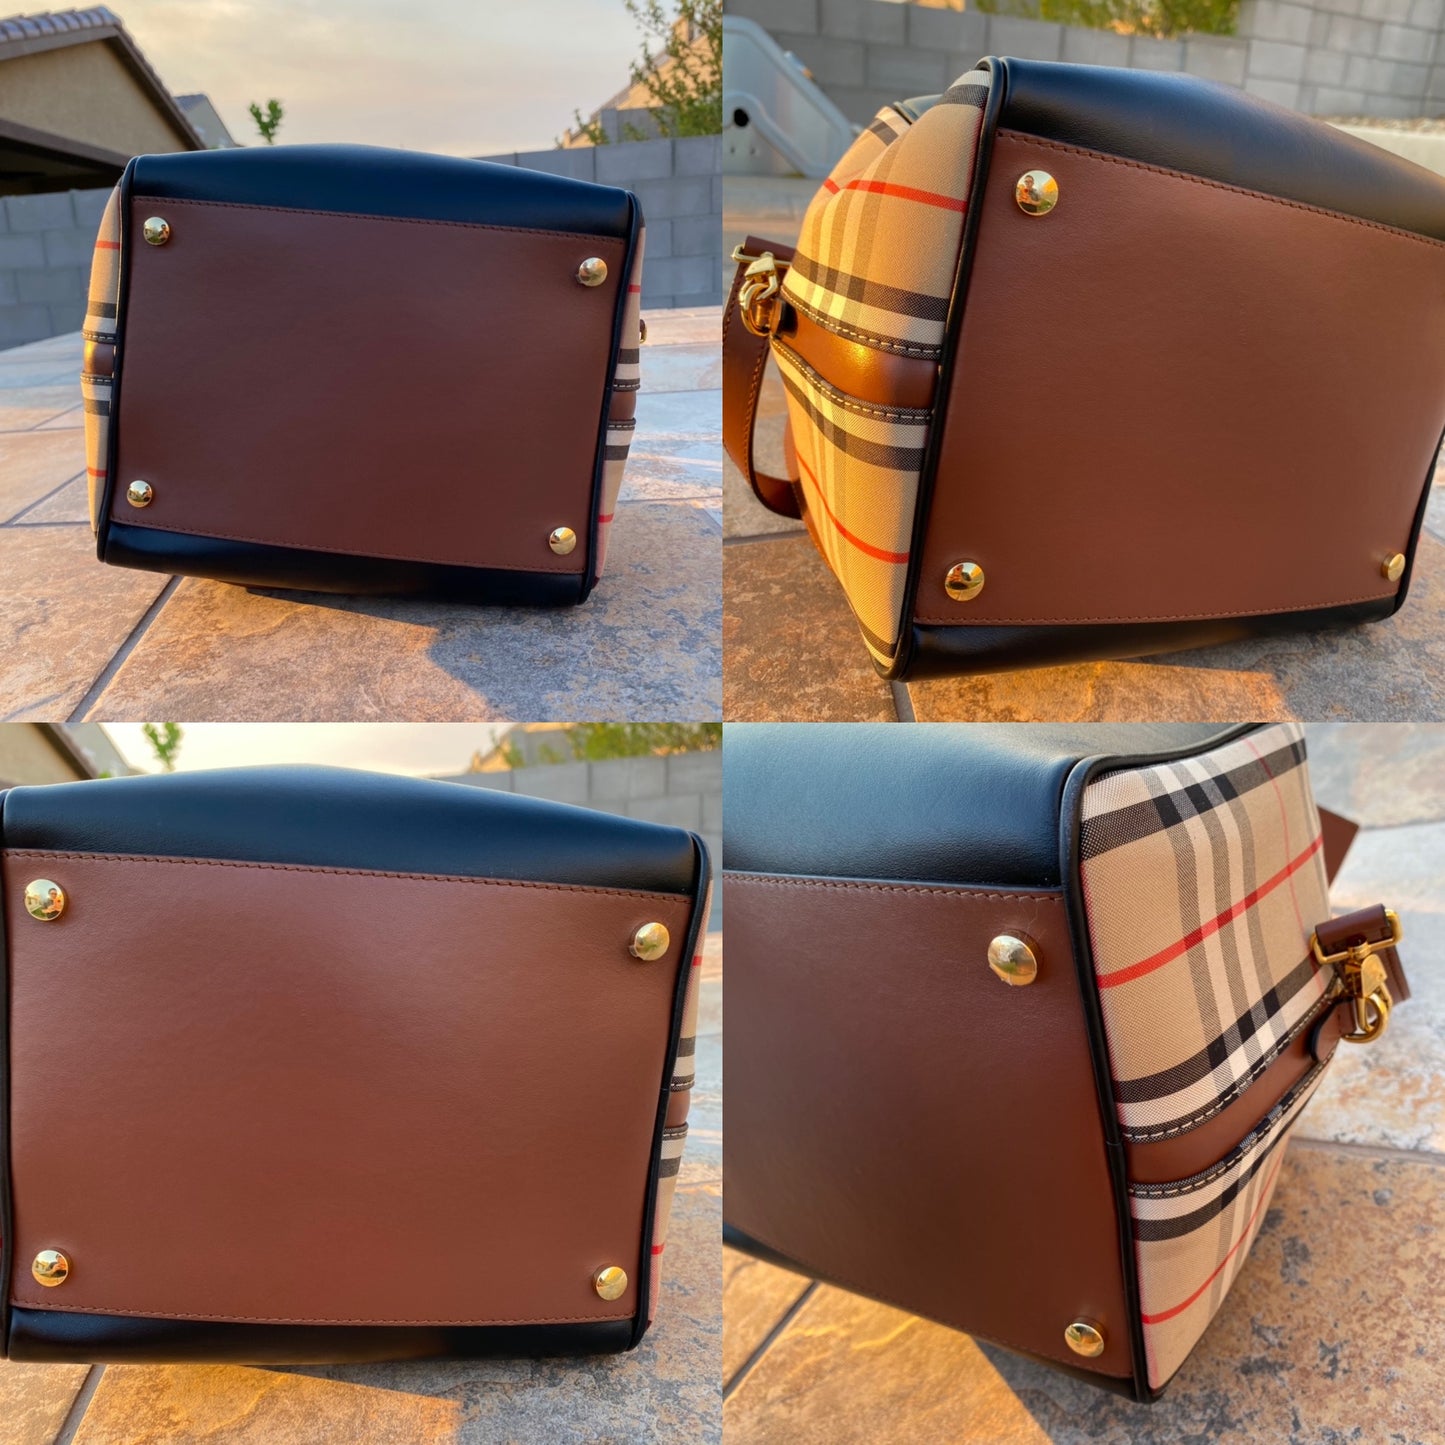 Burberry Small Leather Check Cube Bag